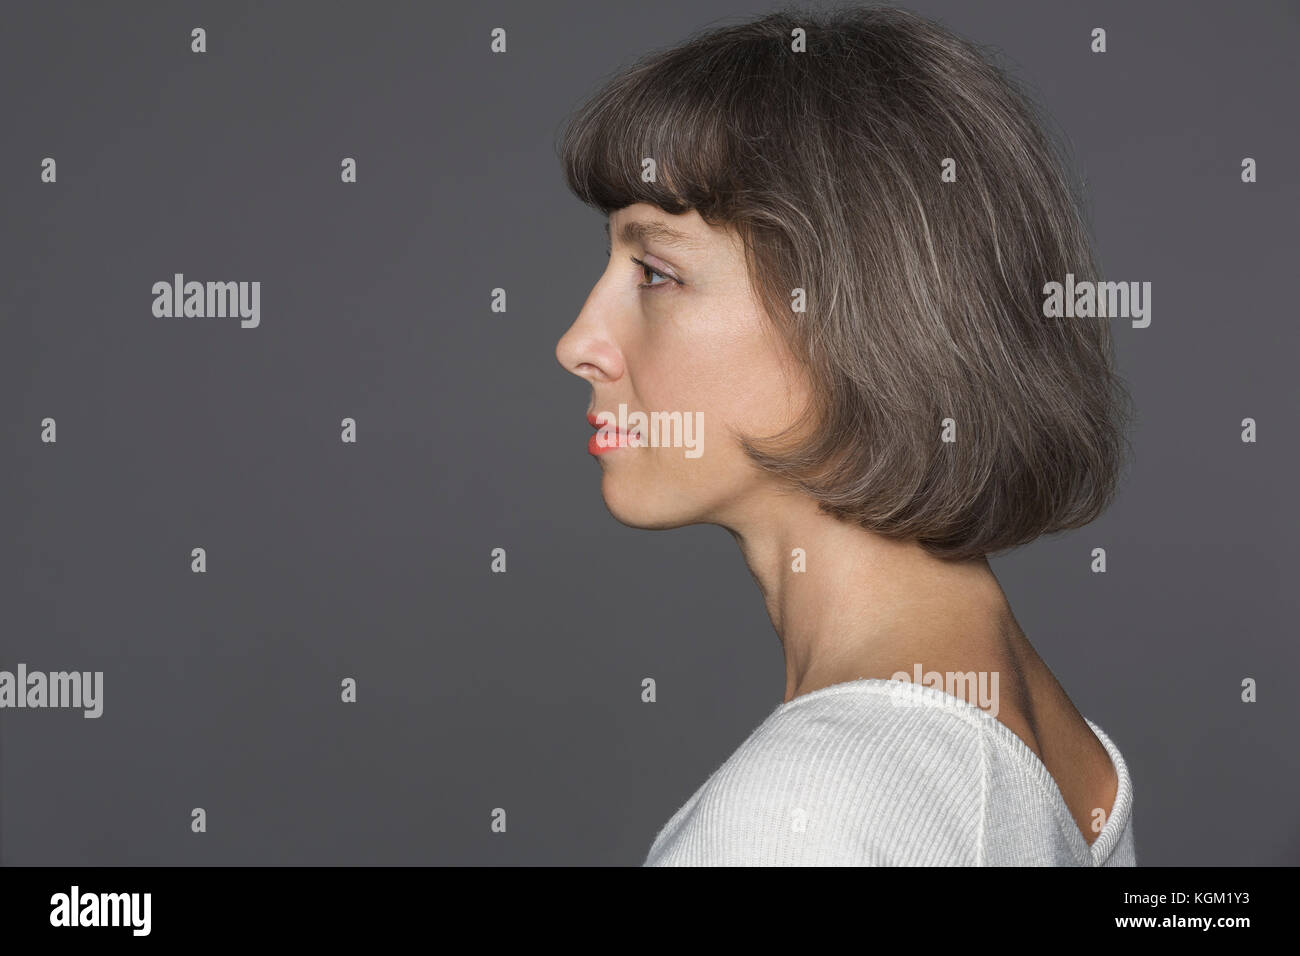 Side view of mature woman with brown hair against gray background Stock Photo